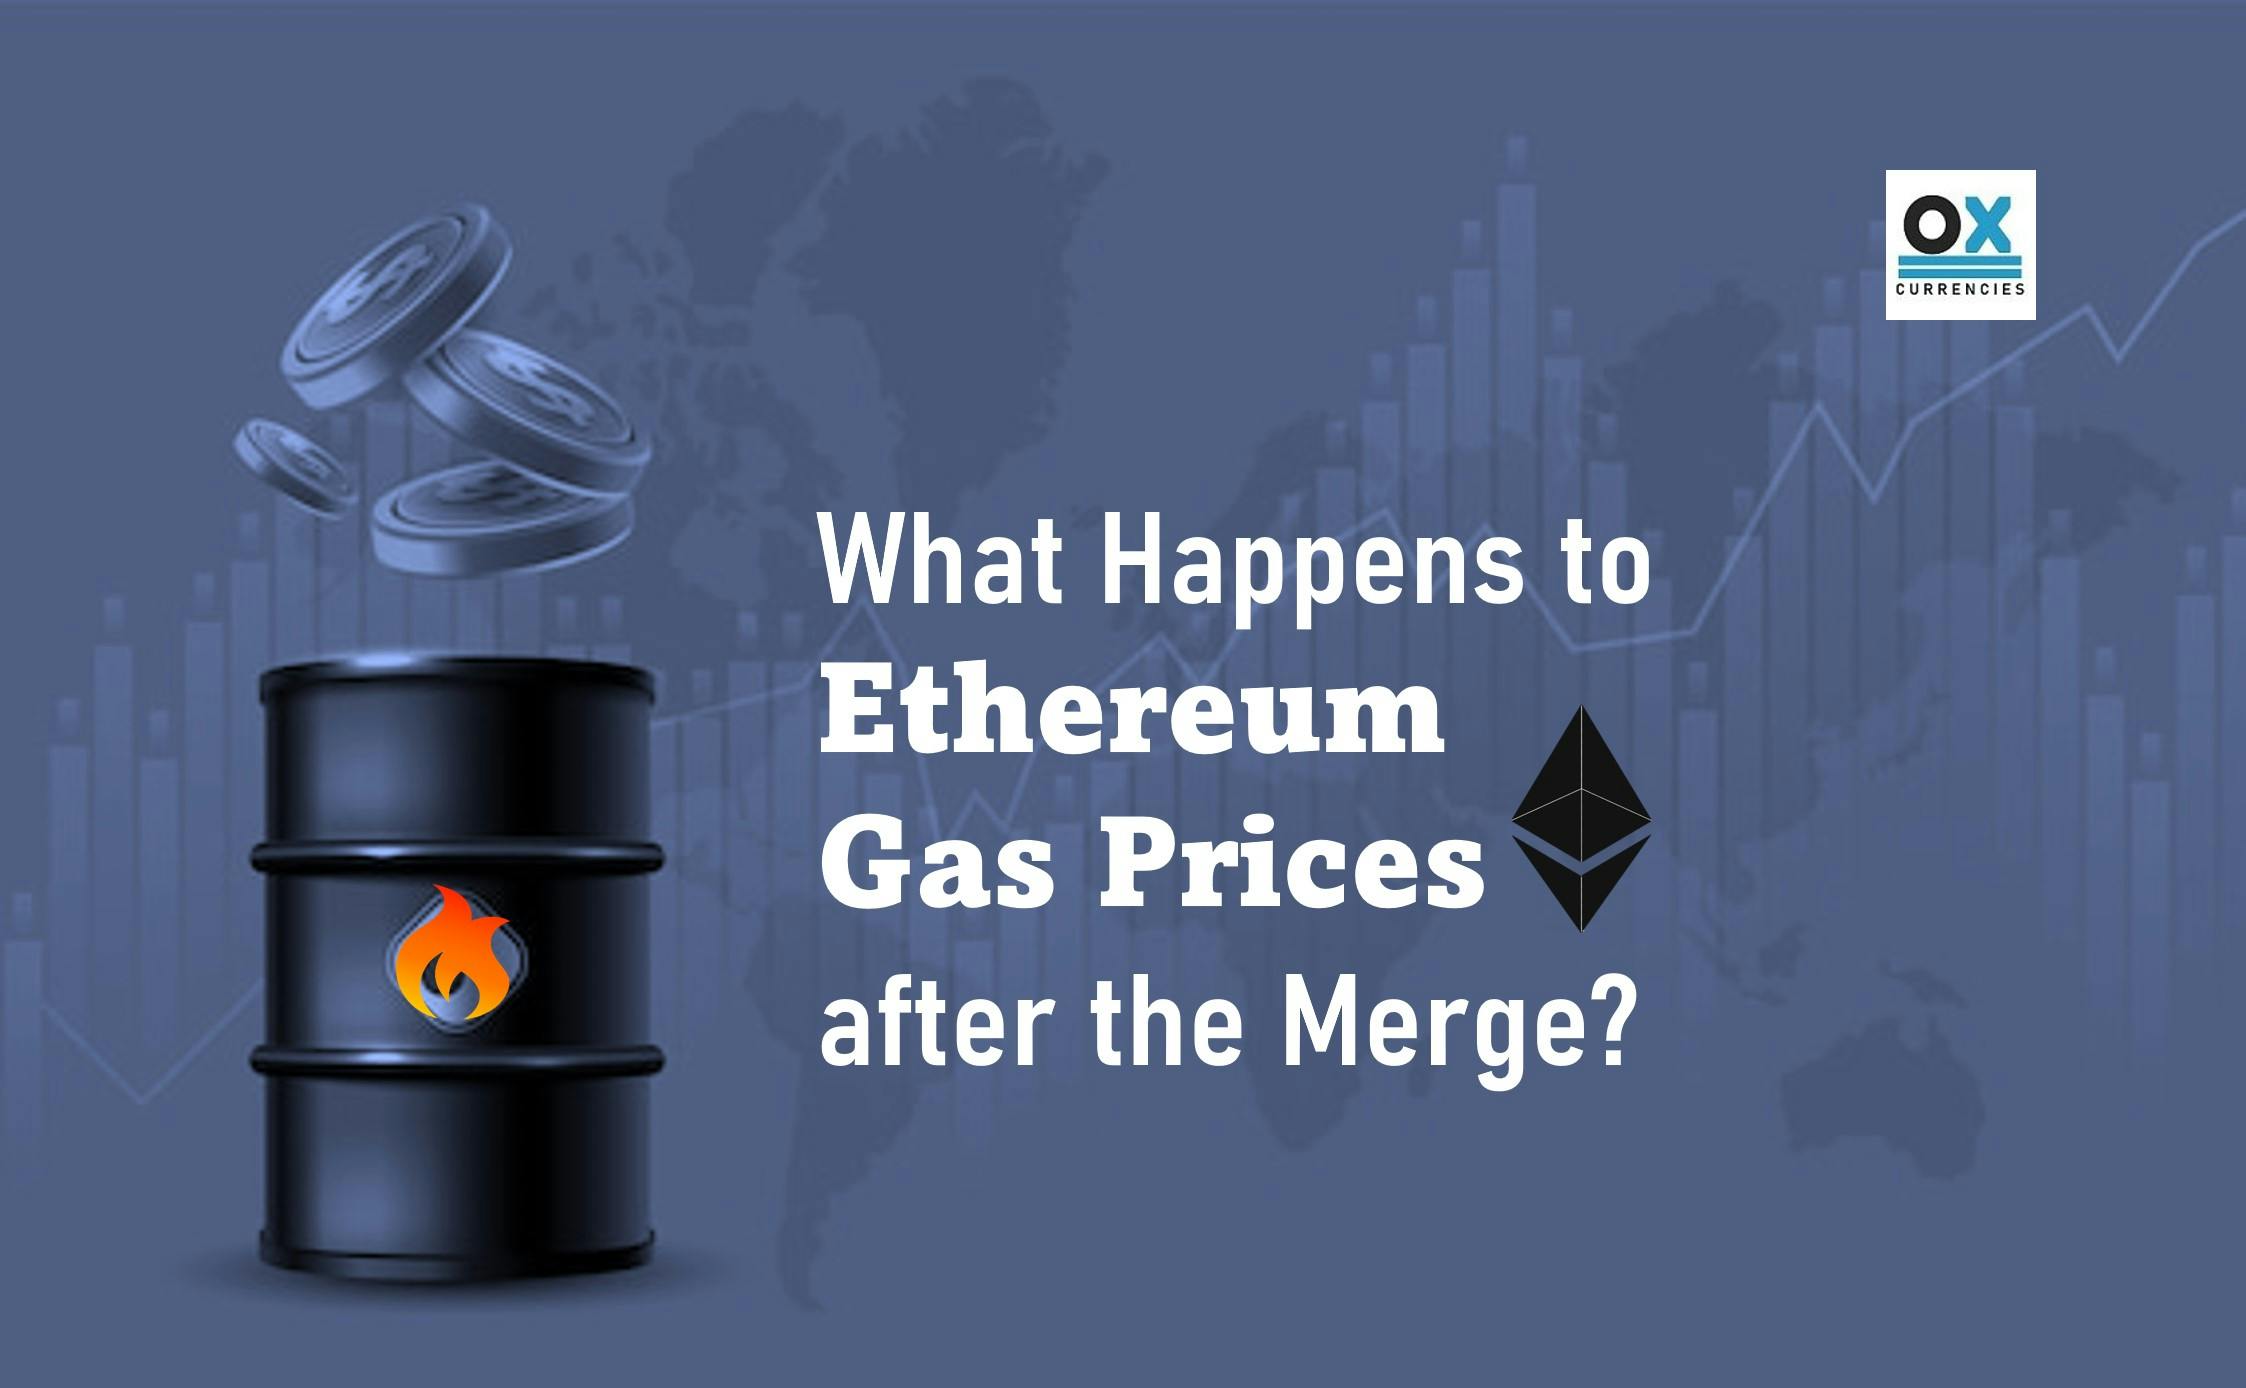 What Happens to Ethereum Gas Prices after the Merge?